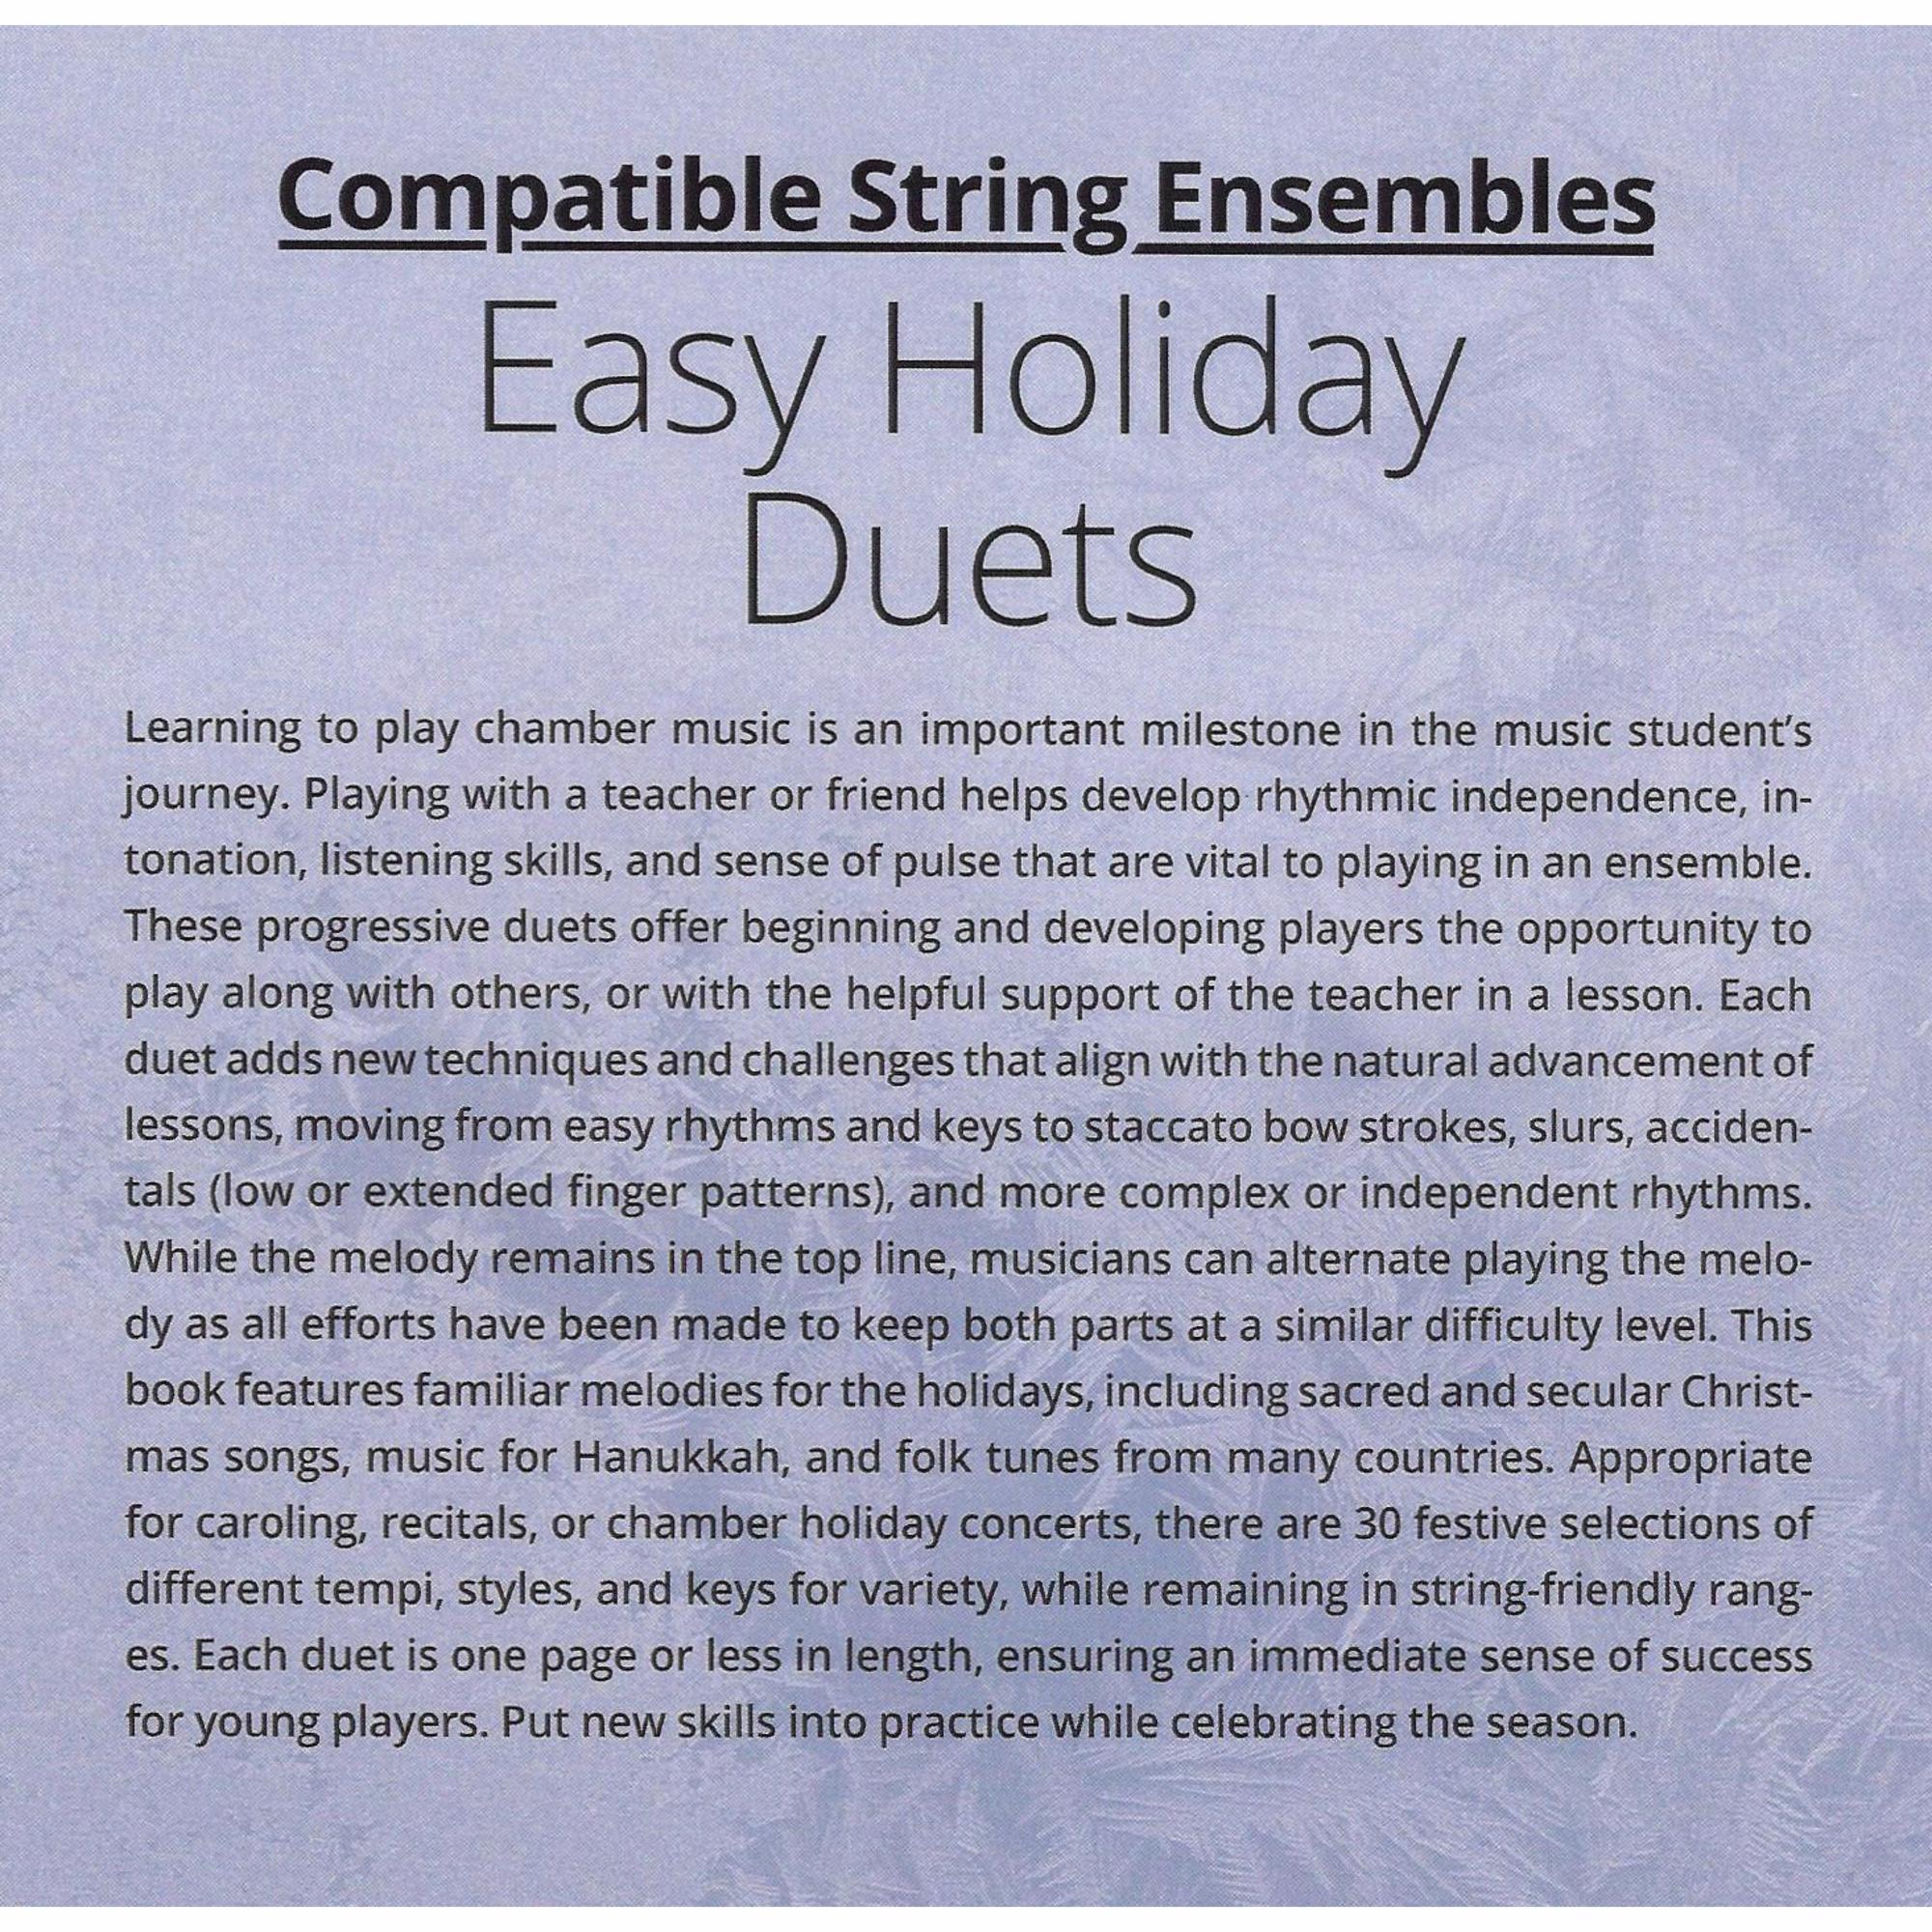 Easy Holiday Duets for Violin, Viola, Cello or Bass